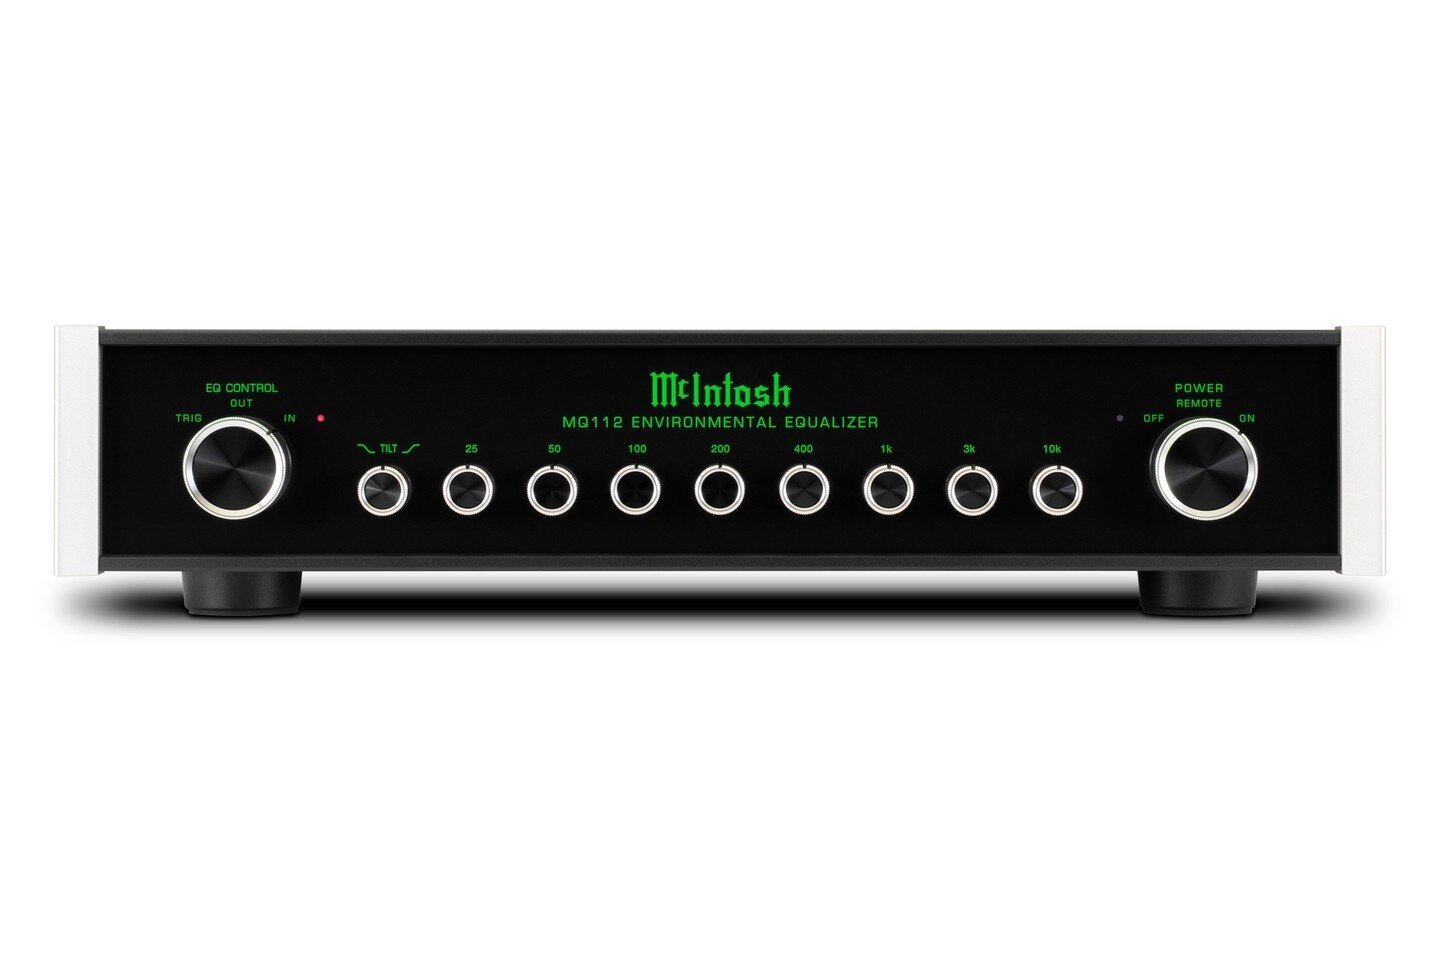 New from McIntosh! Take control of your sound with the MQ112 Environmental Equalizer. A great way to add EQ to an older system.

In the relentless pursuit of perfect audio, McIntosh understands the frustration of adapting your living space for optima